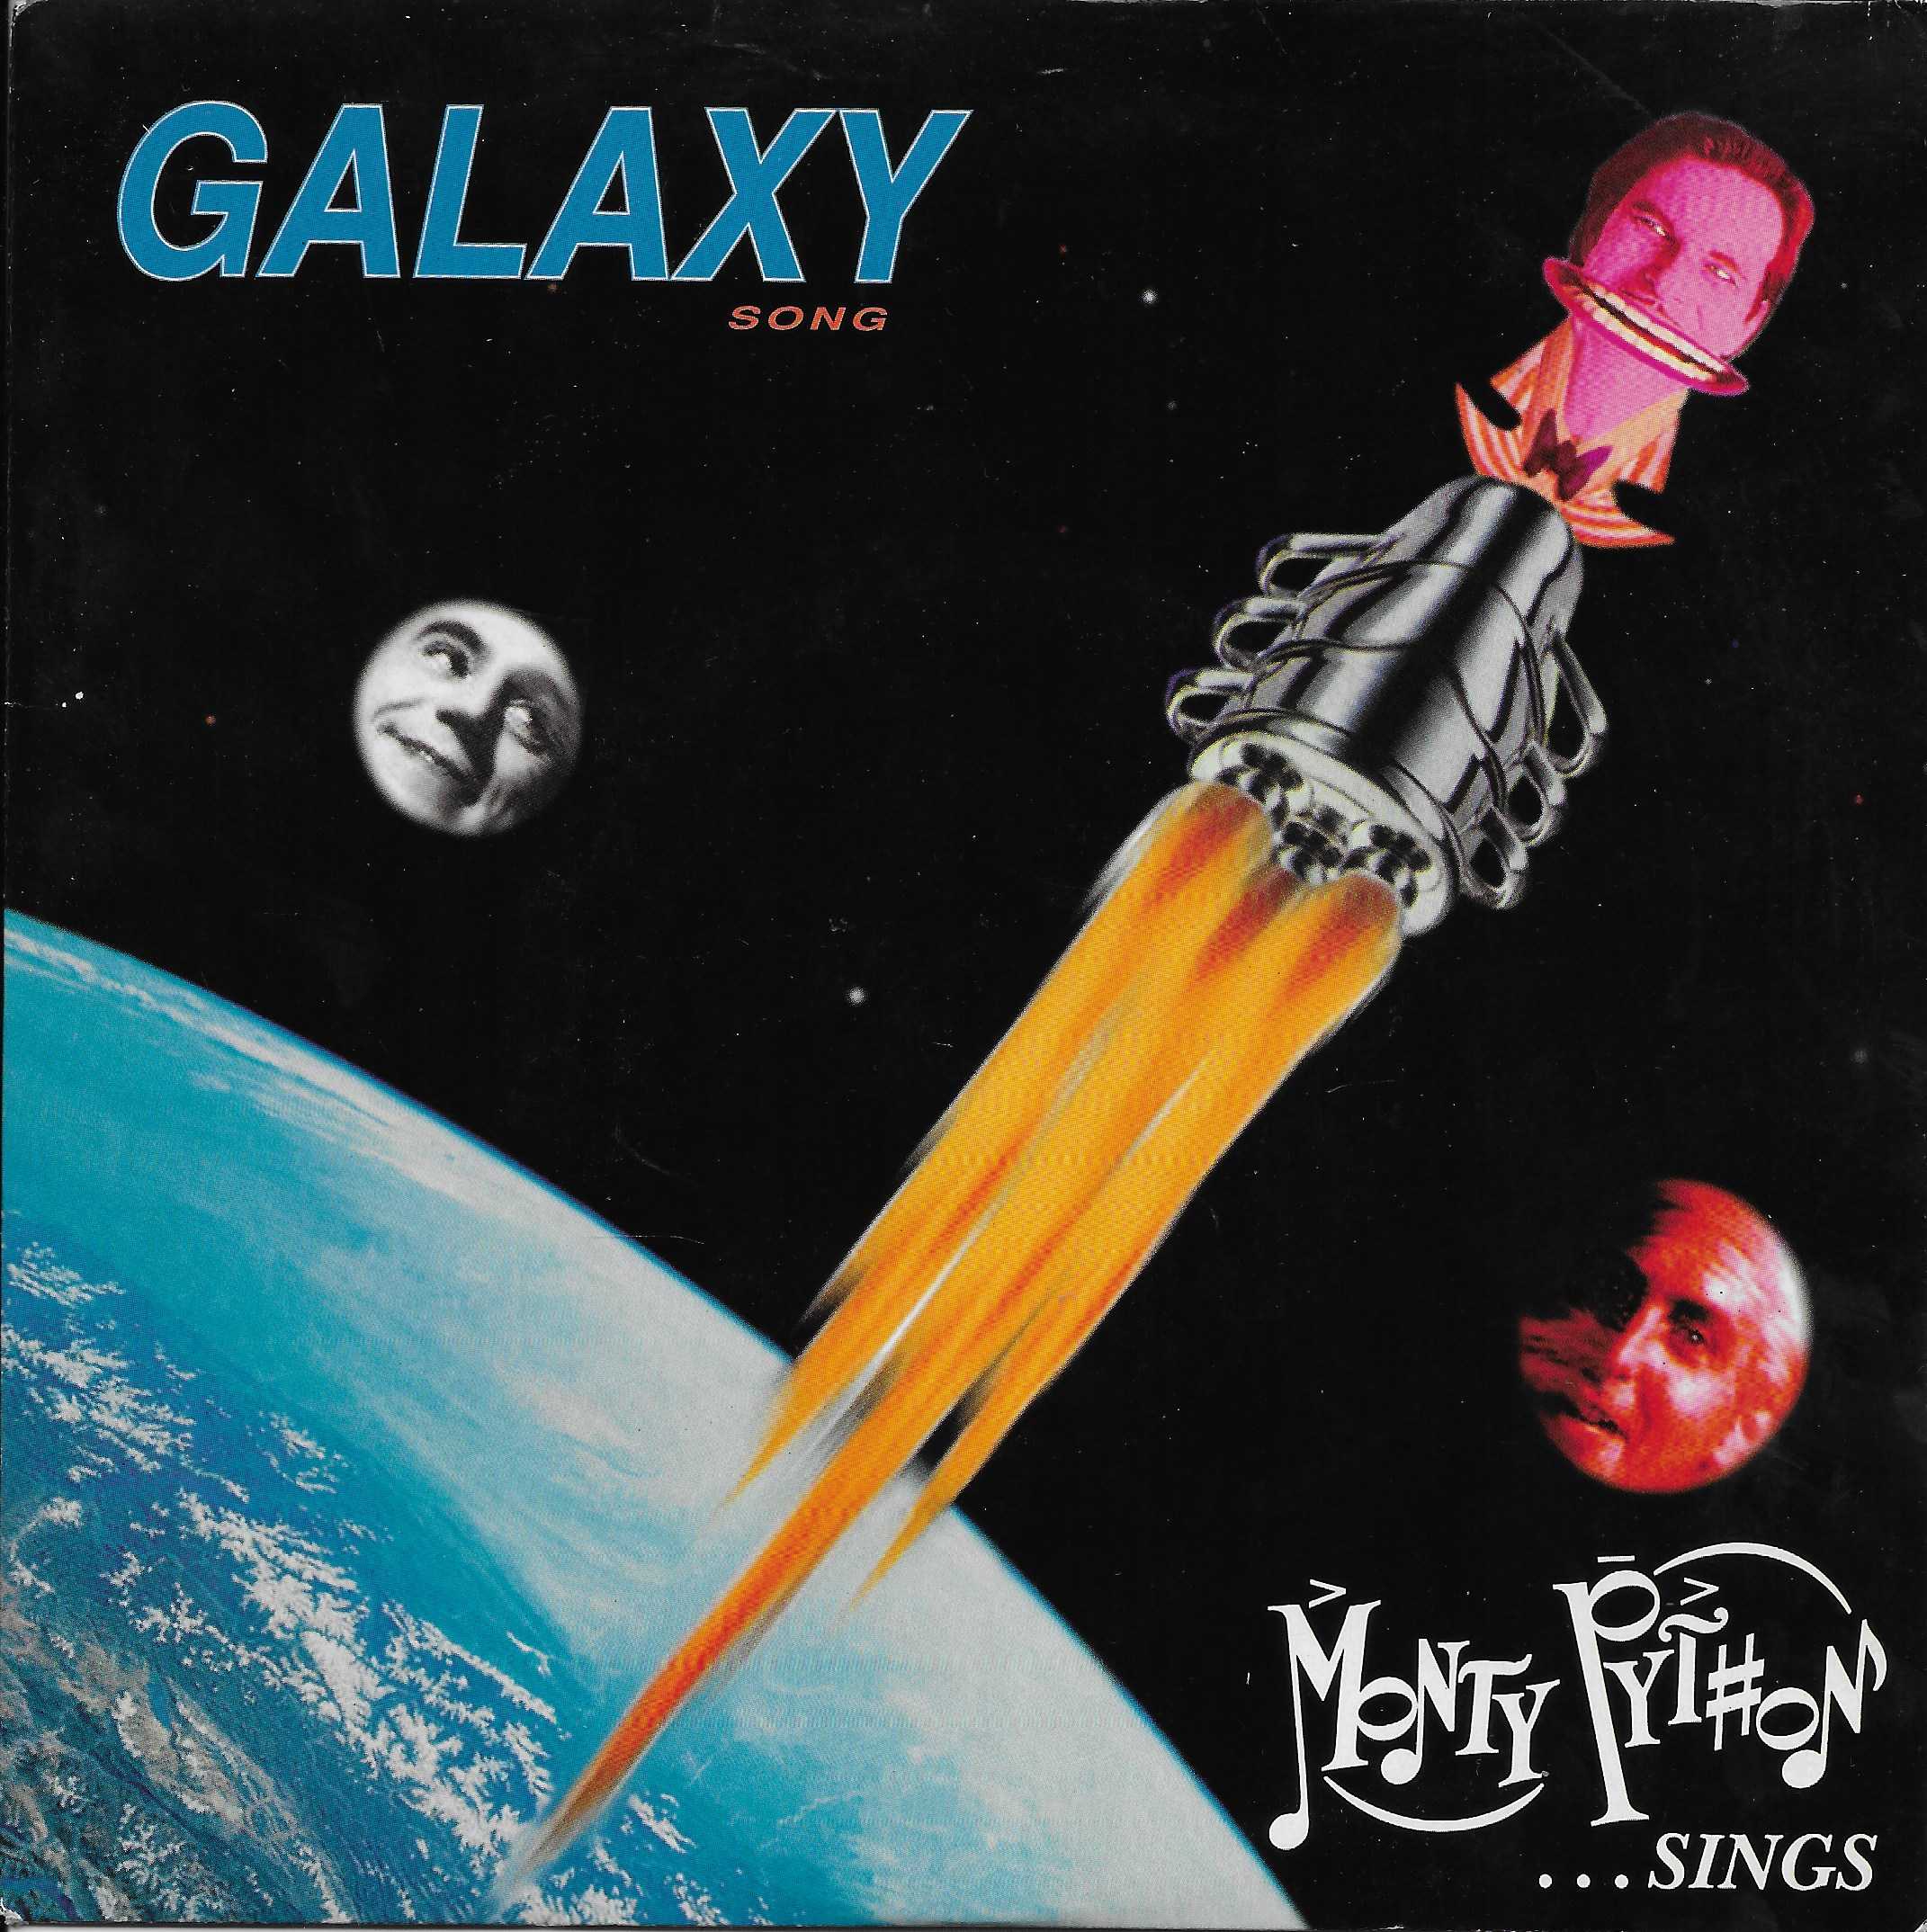 Picture of PYTH 2 Galaxy song (Monty Python's flying circus) by artist Monty Python from the BBC singles - Records and Tapes library